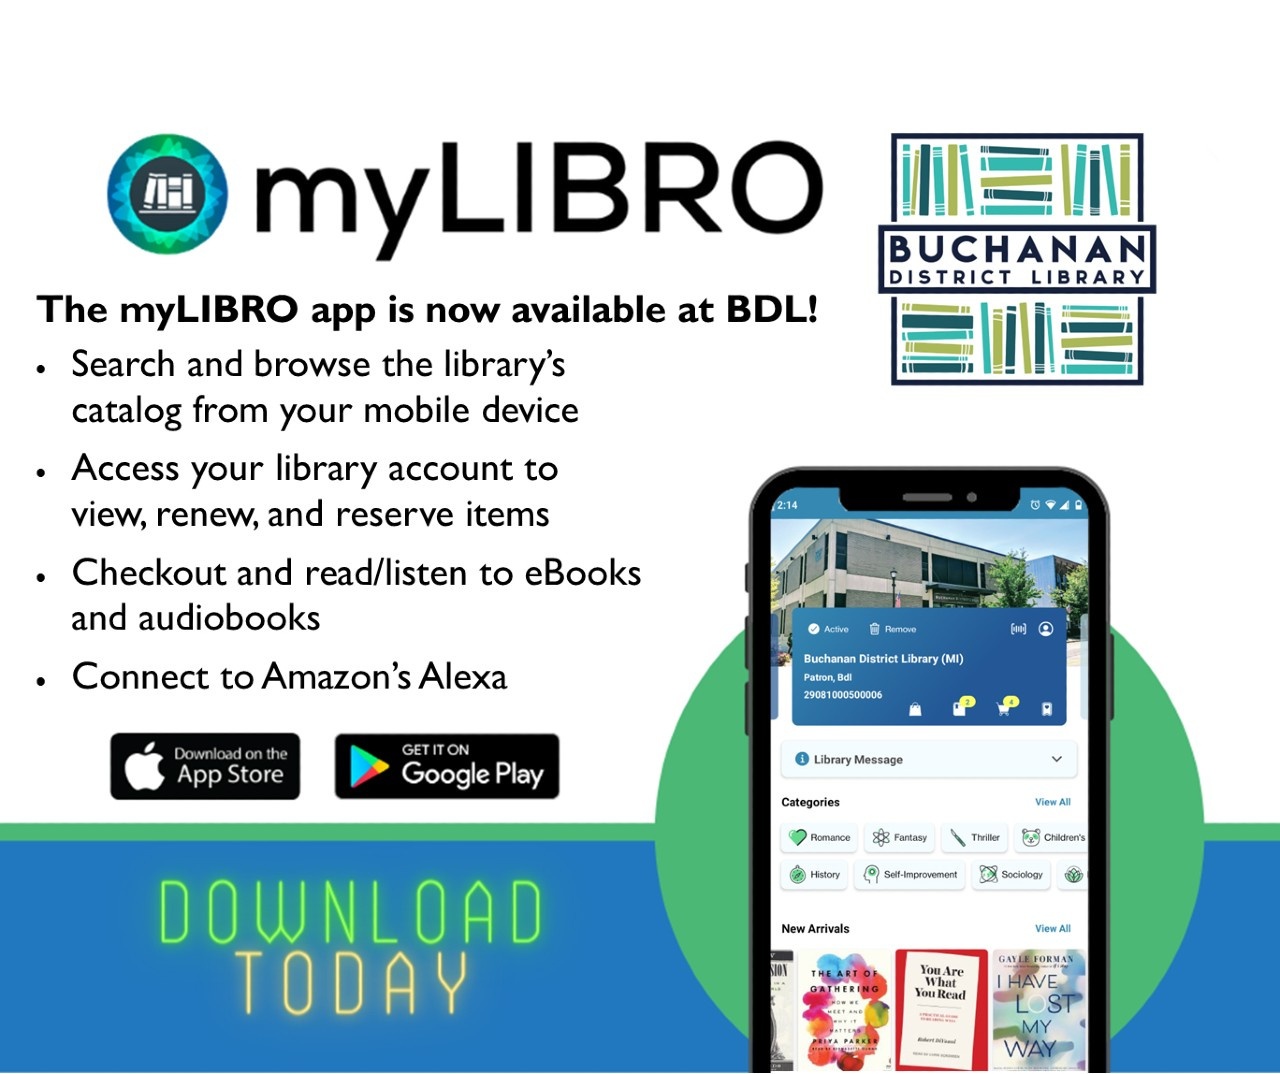 The MyLIBRO app is now available at BDL